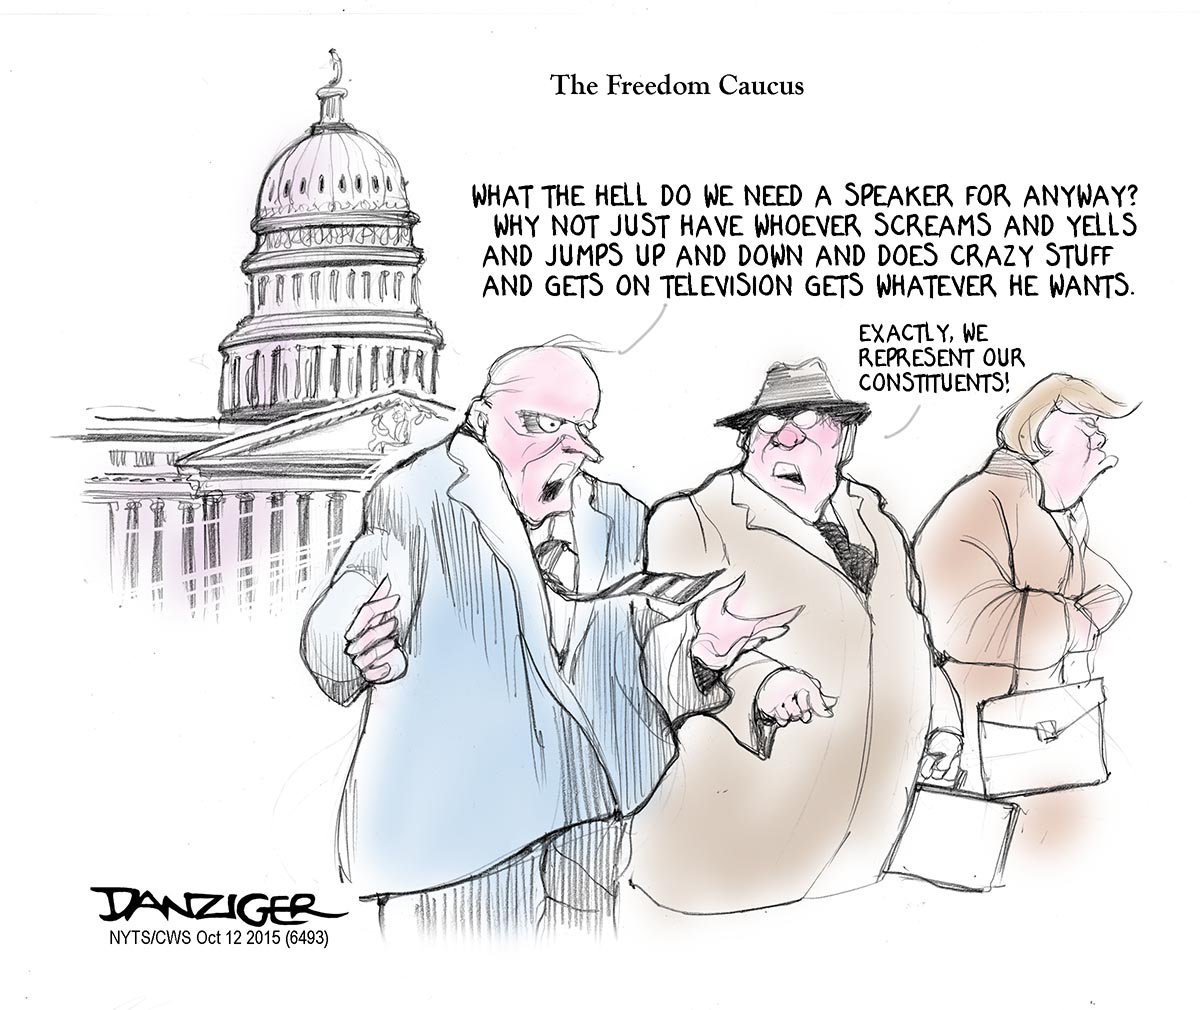 Freedom Caucus, US house, GOP Right Wing, speaker of the house, political cartoon